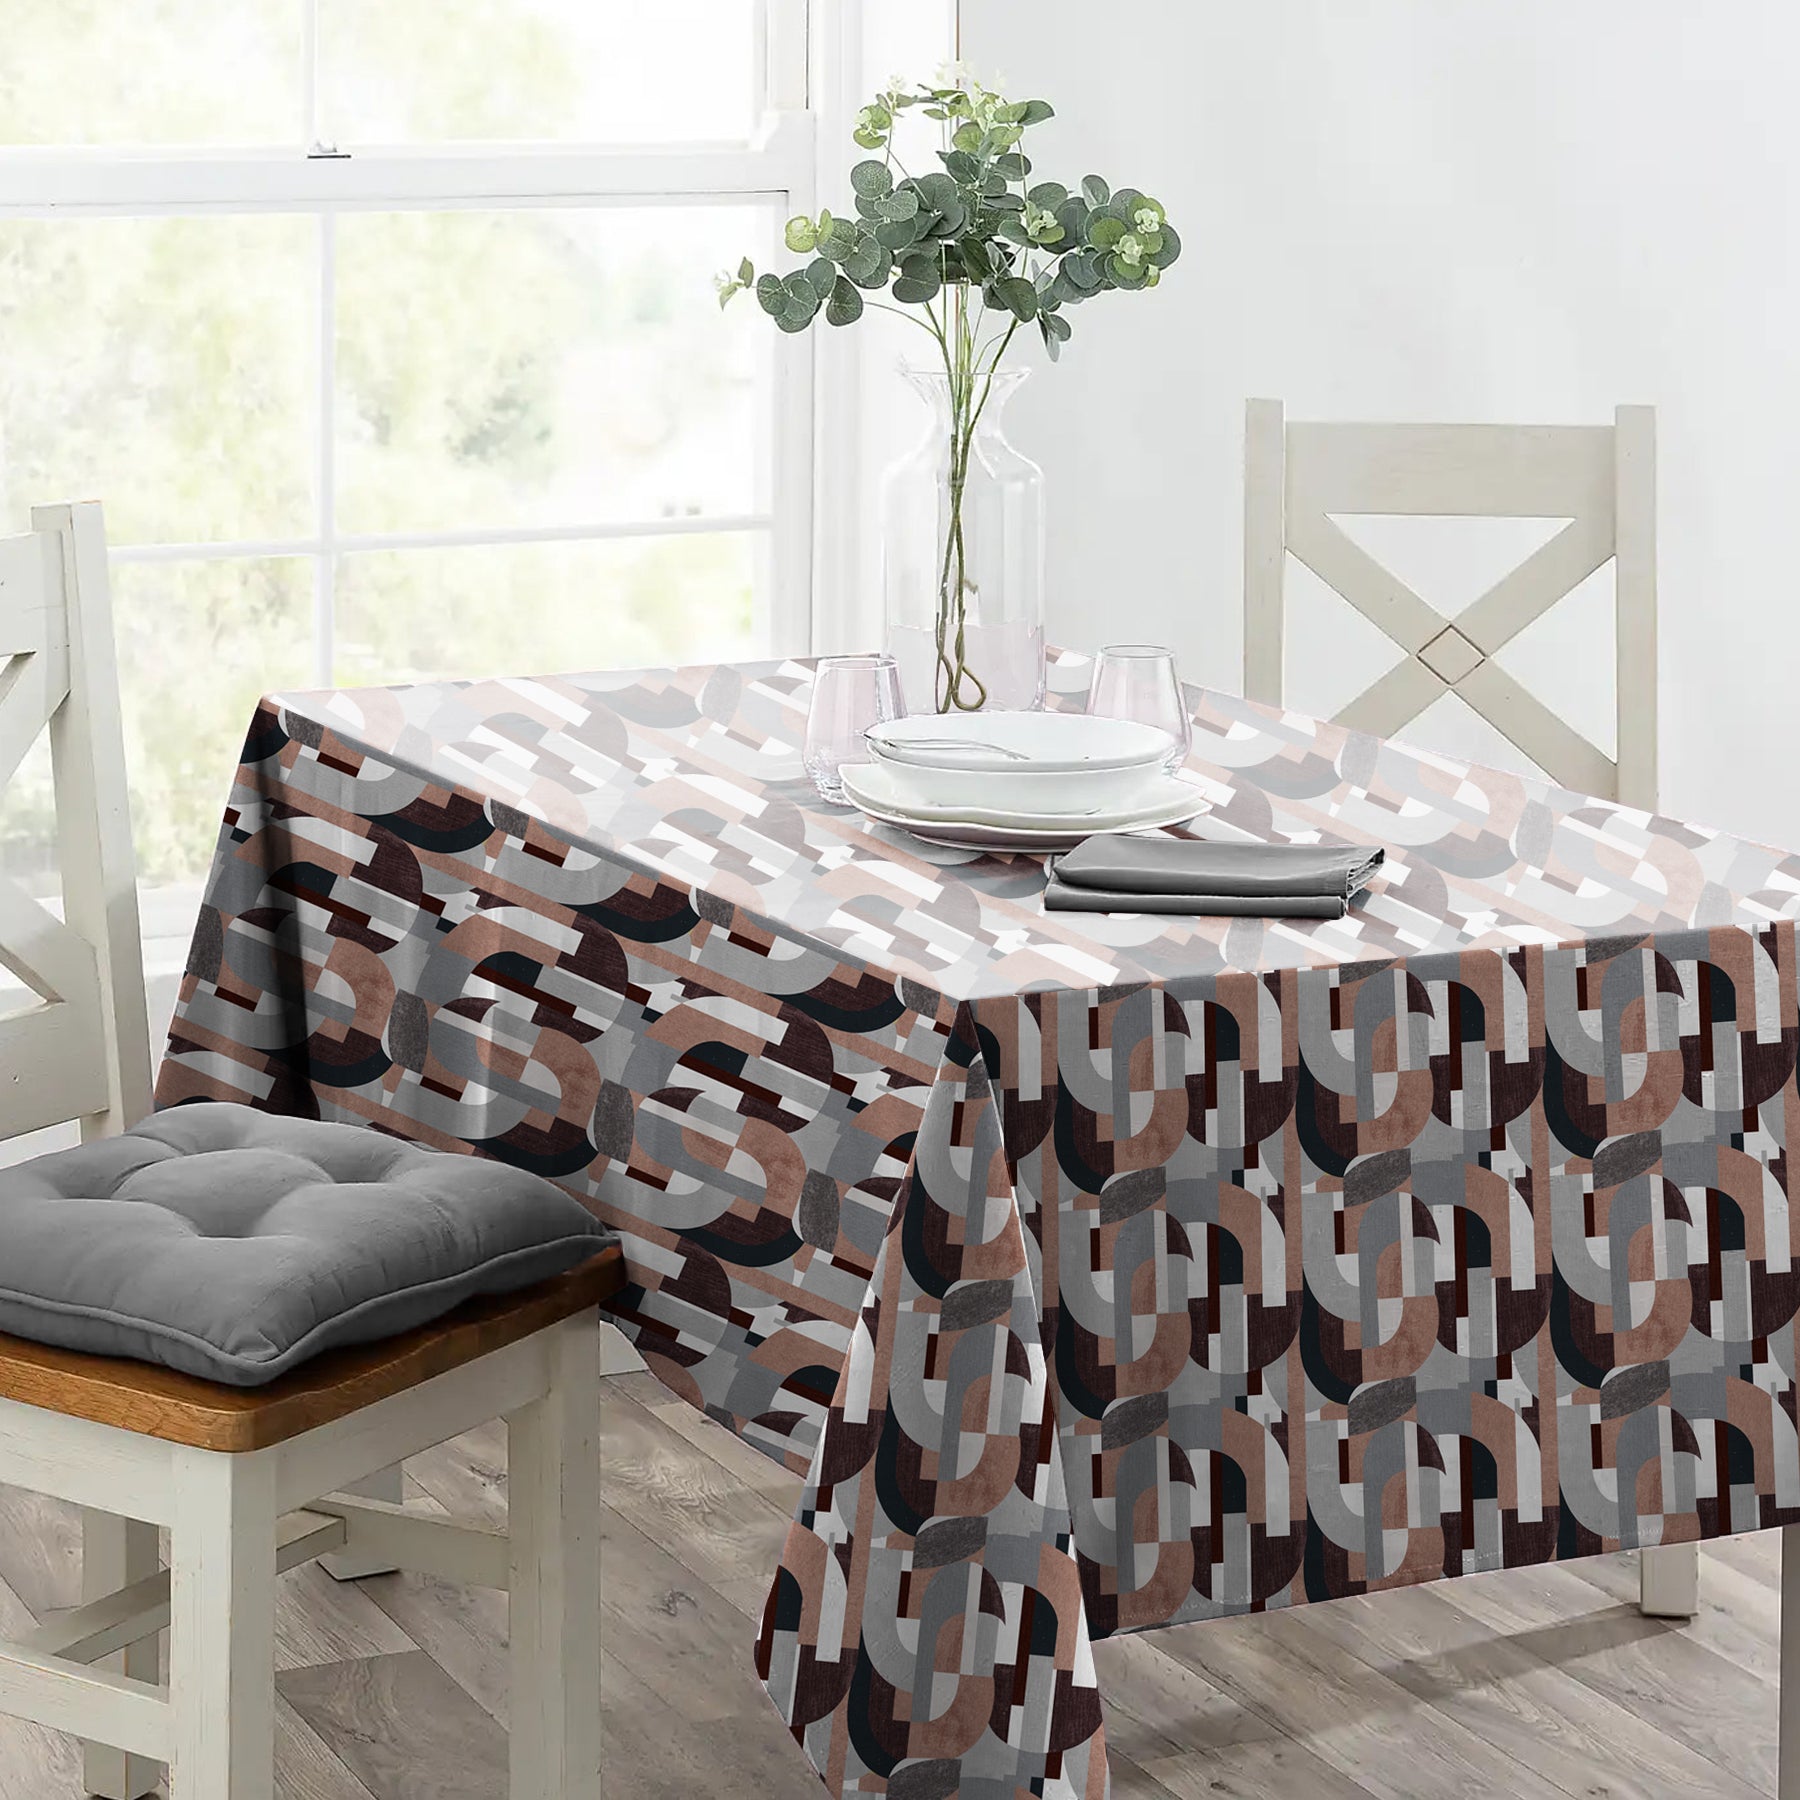 ILLUSION CURVES 6 SEATER TABLE CLOTH BROWN/GREY